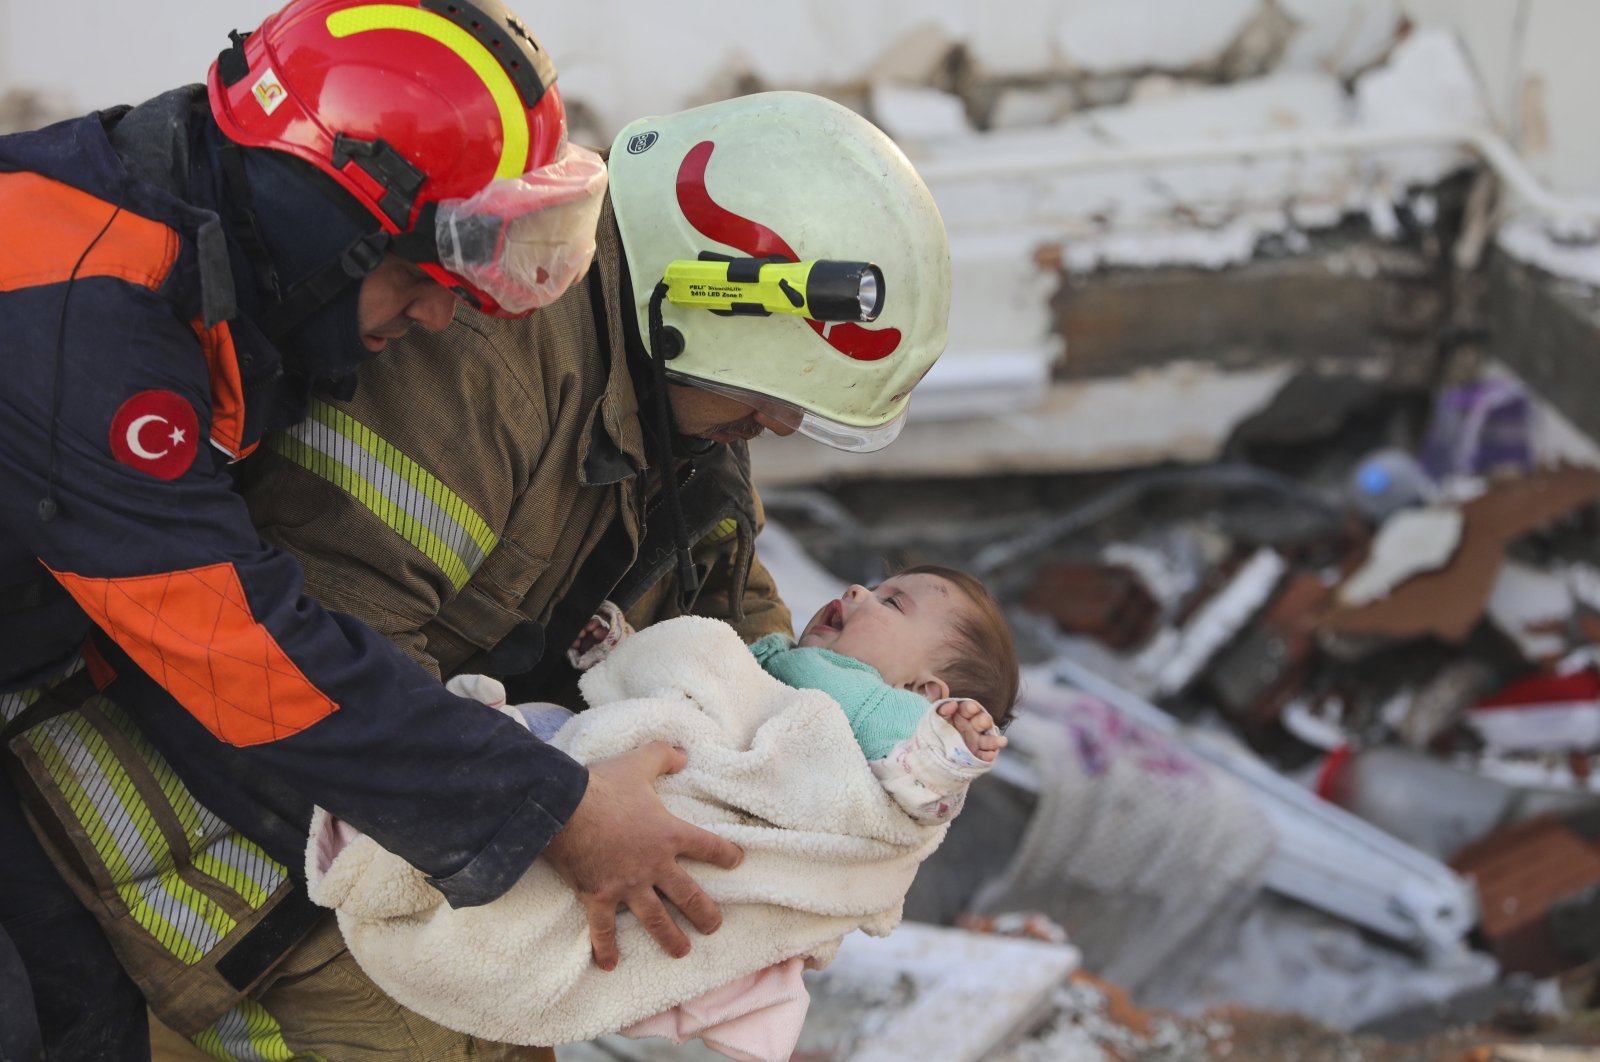 Six-month-old baby Ayşe Vera Yılmaz is rescued alive from the wreckage of a building, 29 hours after it collapsed during the earthquakes, in the Odabaşı neighborhood of Hatay, southern Türkiye, Feb. 6, 2023. (AA Photo)